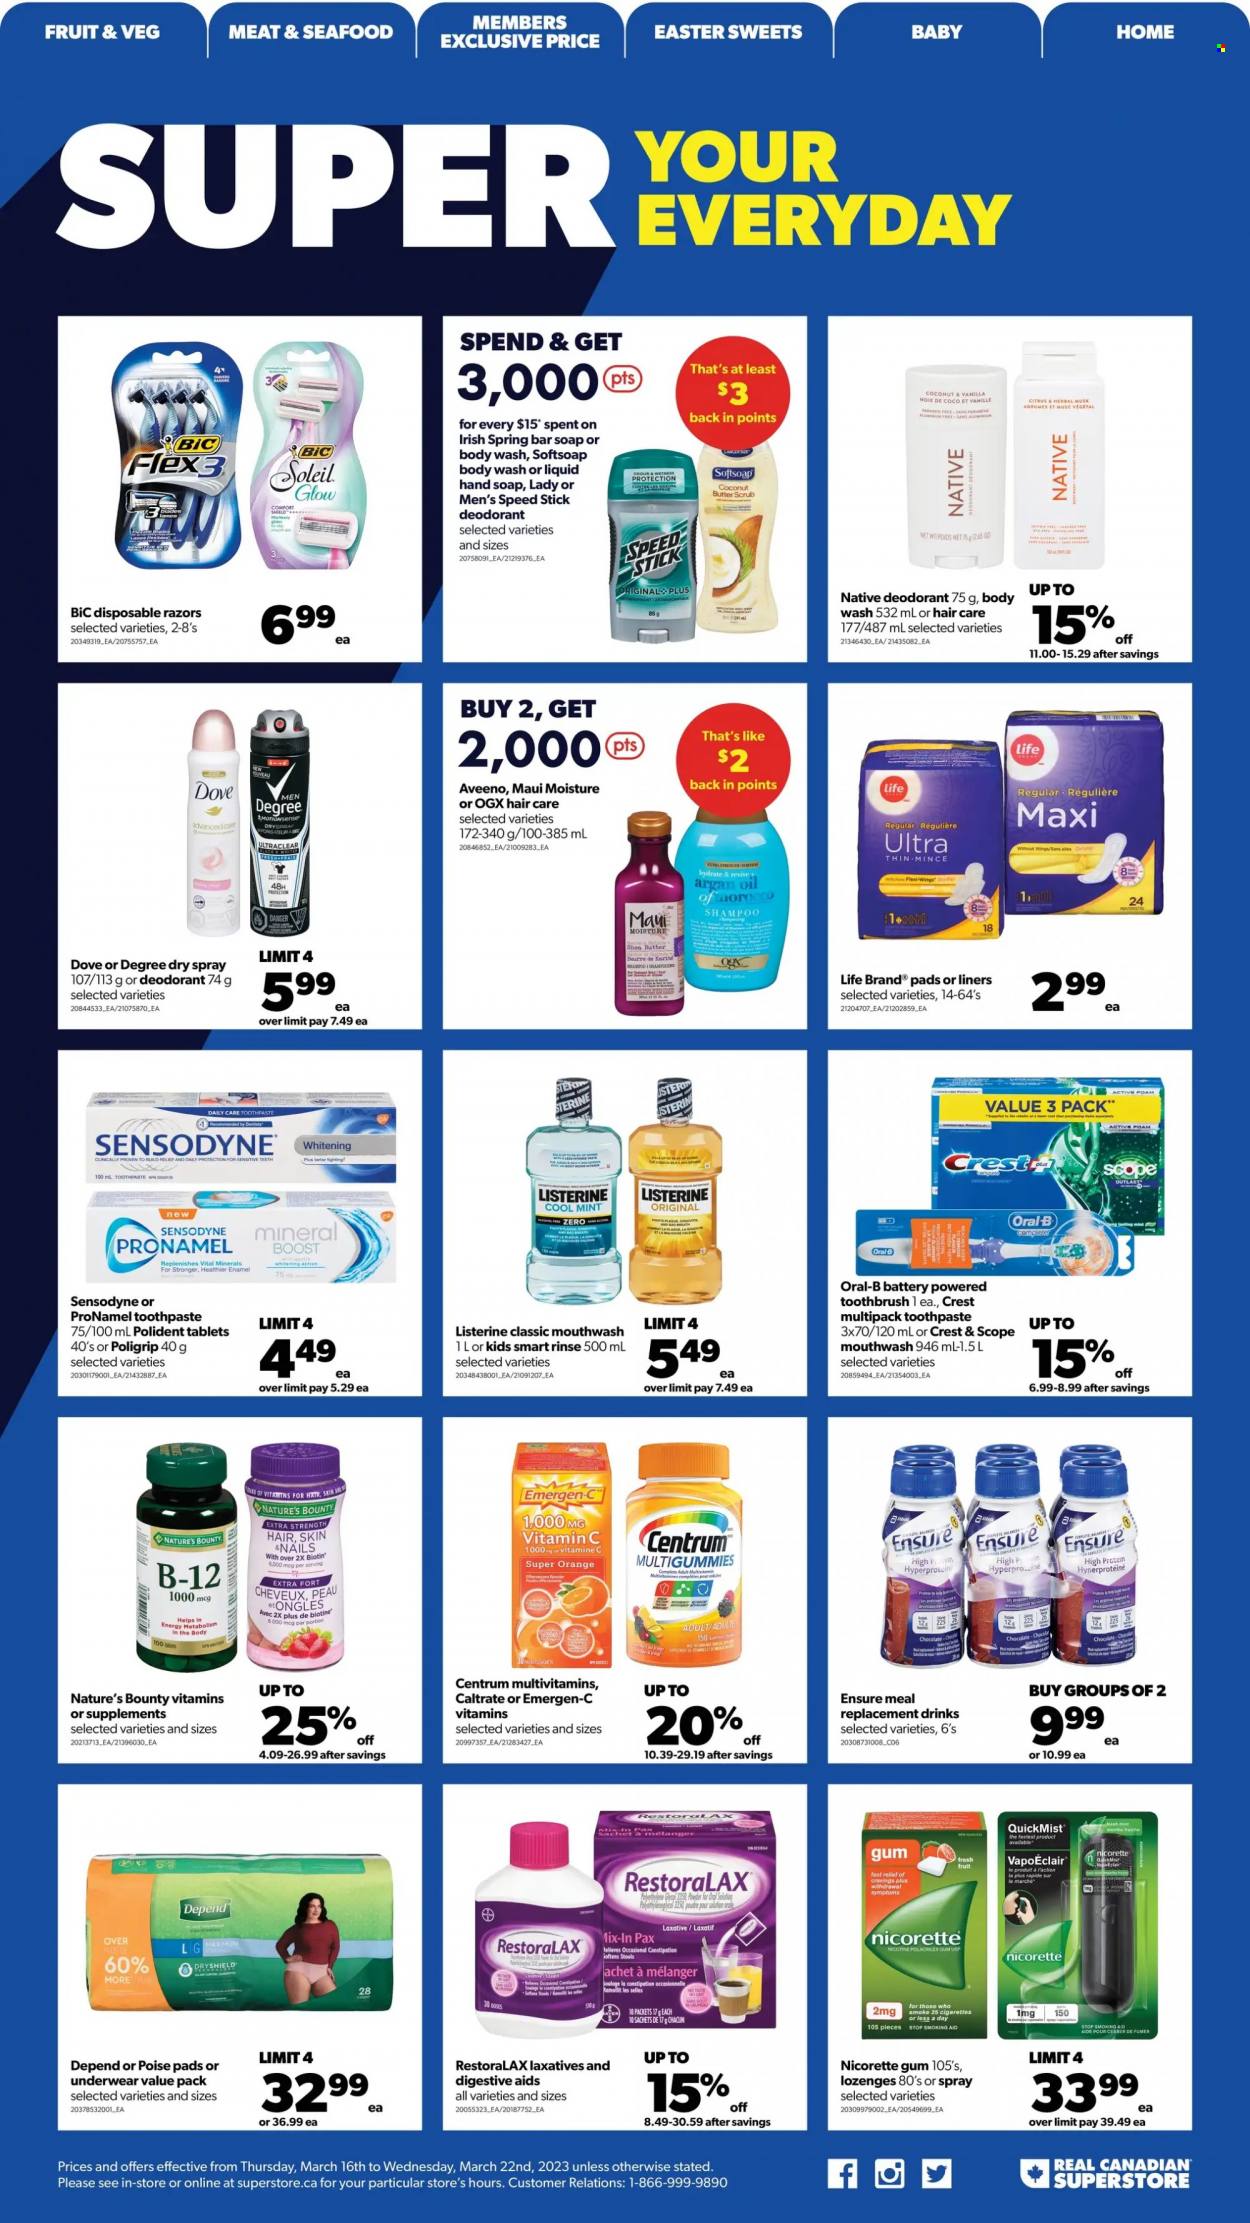 thumbnail - Real Canadian Superstore Flyer - March 16, 2023 - March 22, 2023 - Sales products - oranges, seafood, butter, Dove, Boost, Aveeno, body wash, Softsoap, hand soap, soap bar, soap, toothbrush, toothpaste, mouthwash, Polident, Crest, sanitary pads, OGX, Maui Moisture, anti-perspirant, Speed Stick, BIC, disposable razor, Pax, Biotin, multivitamin, Nature's Bounty, Nicorette, vitamin c, argan oil, Emergen-C, Nicorette Gum, laxative, Centrum, Listerine, shampoo, Oral-B, Sensodyne, deodorant. Page 16.